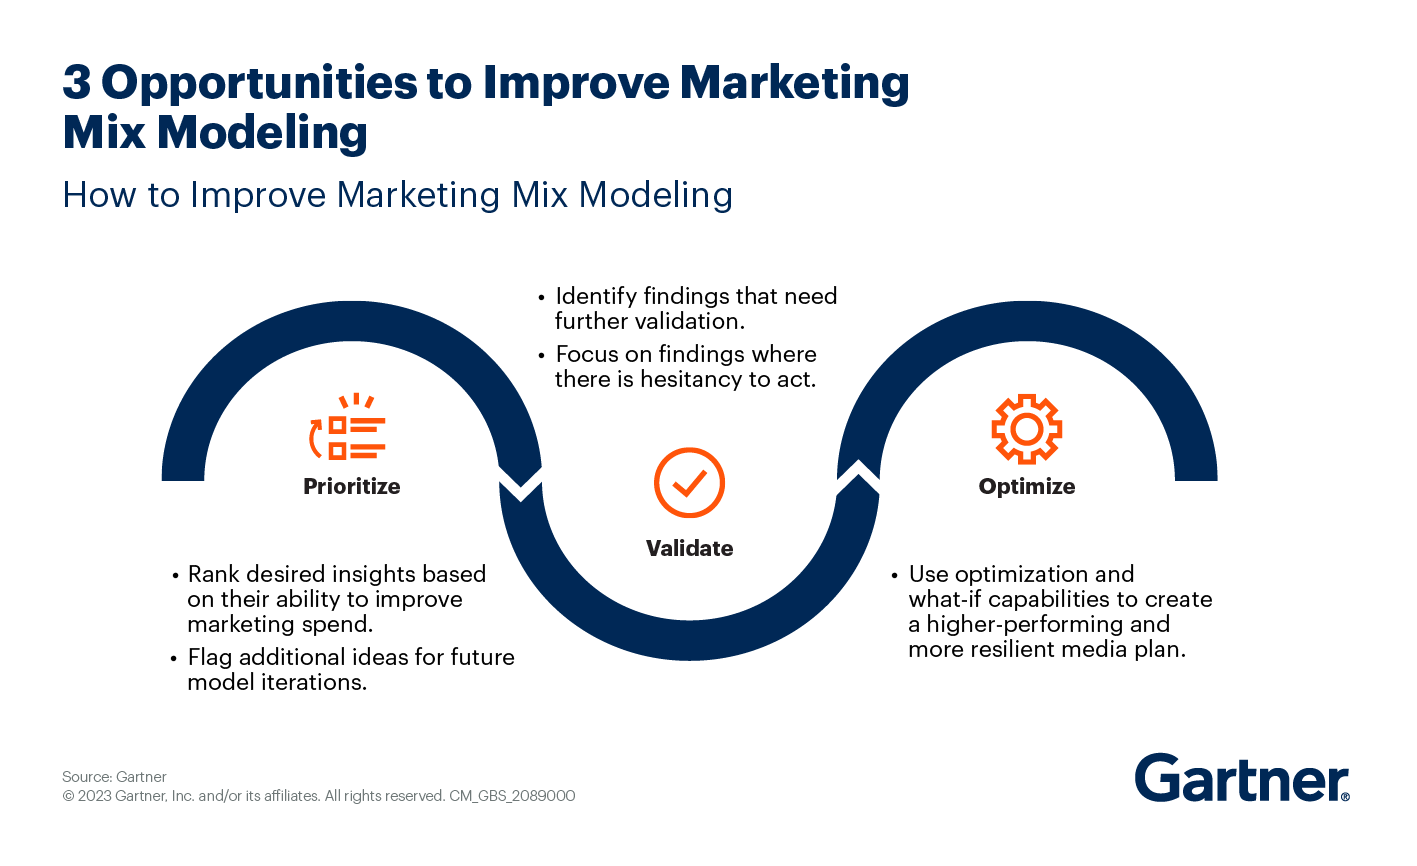 Flying Object - How to improve your marketing mix modelling from Gartner